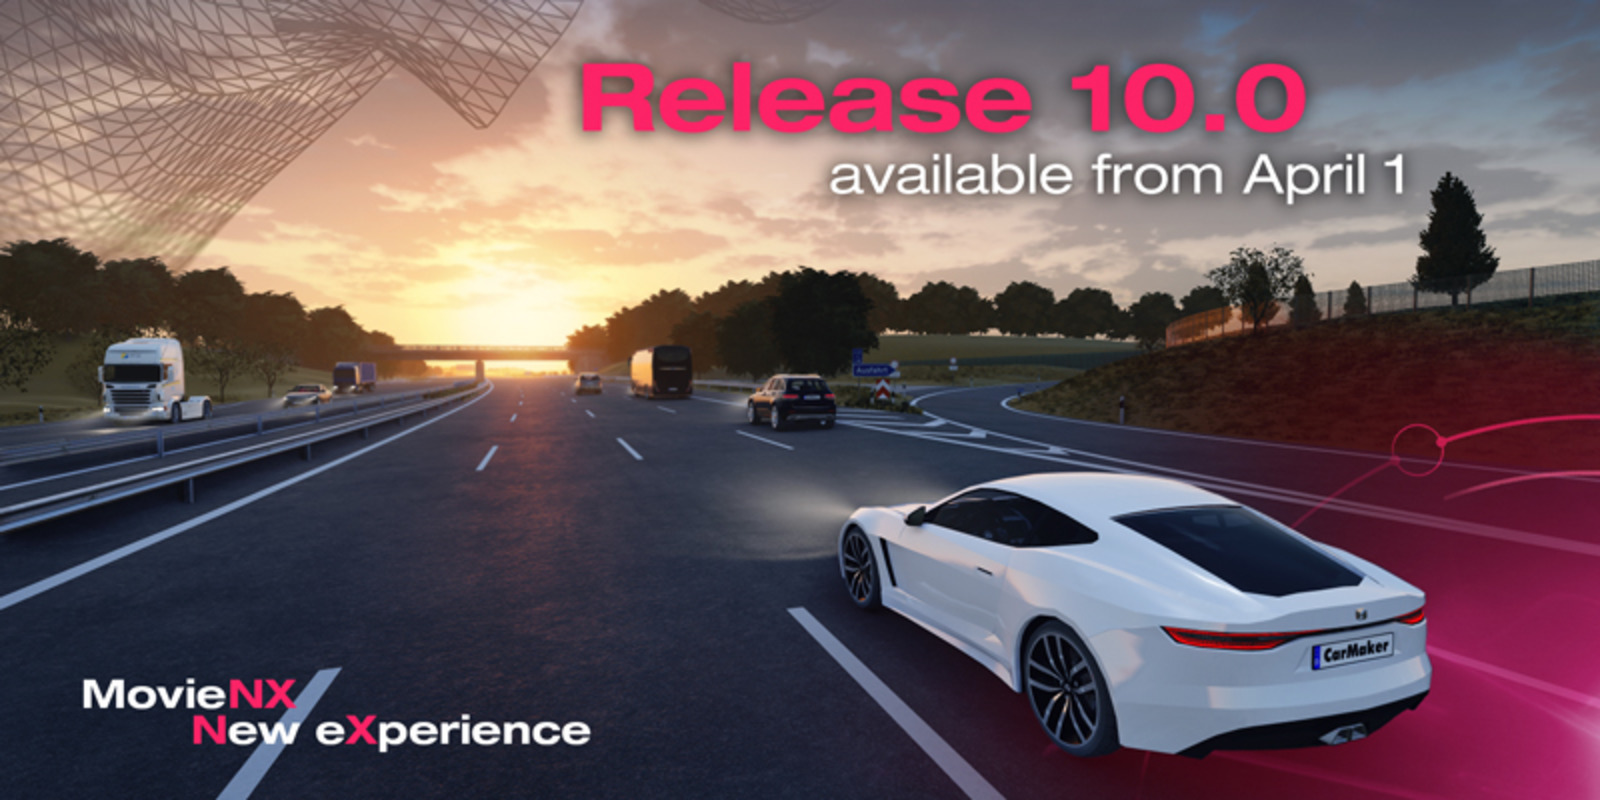 Carmaker 10.0 Release By Ipg Automotive | Unigine: Real-Time 3D Engine